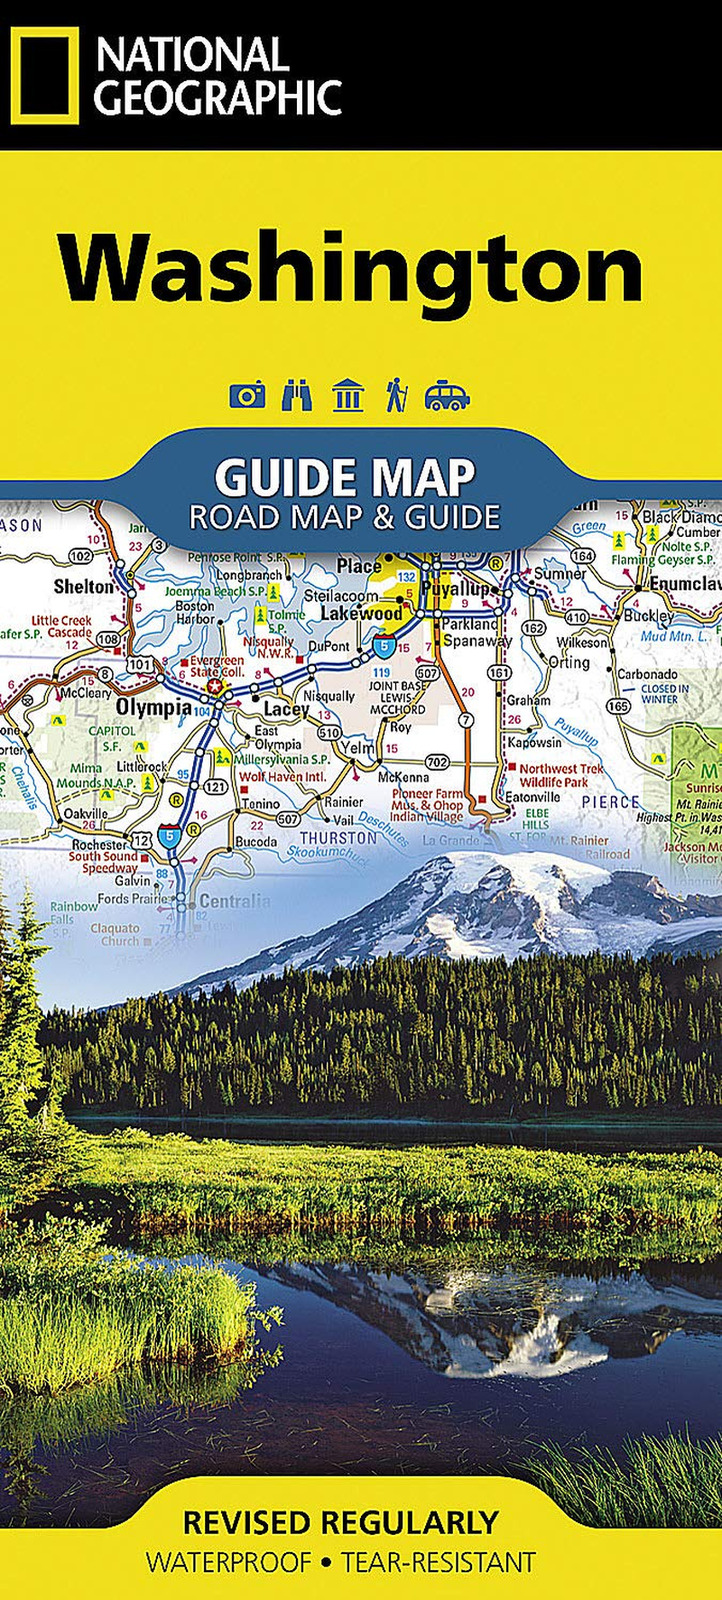 Washington Map (National Geographic Guide Map) - NEW